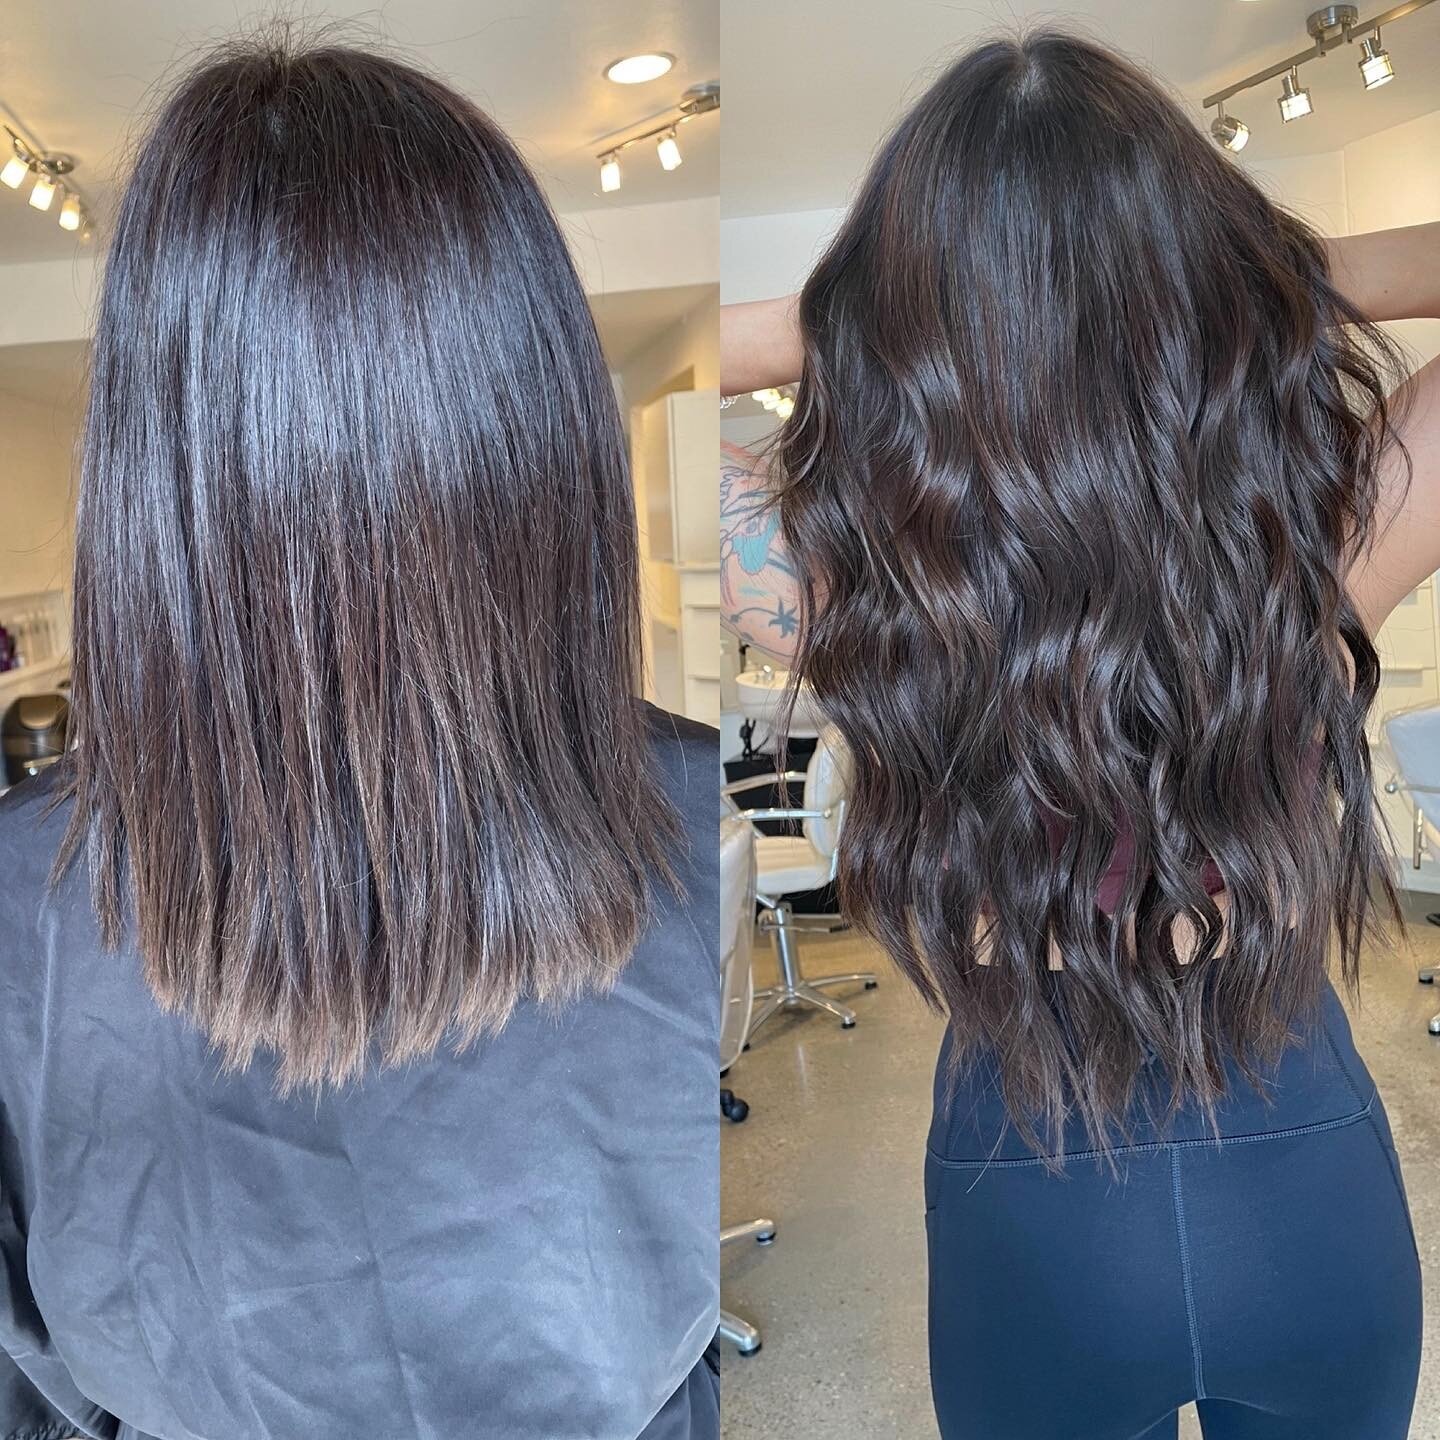 When @filmsthruher wants long hair for the weekend. This kind of transformation in under two hours is the best part of hair extensions😍😍